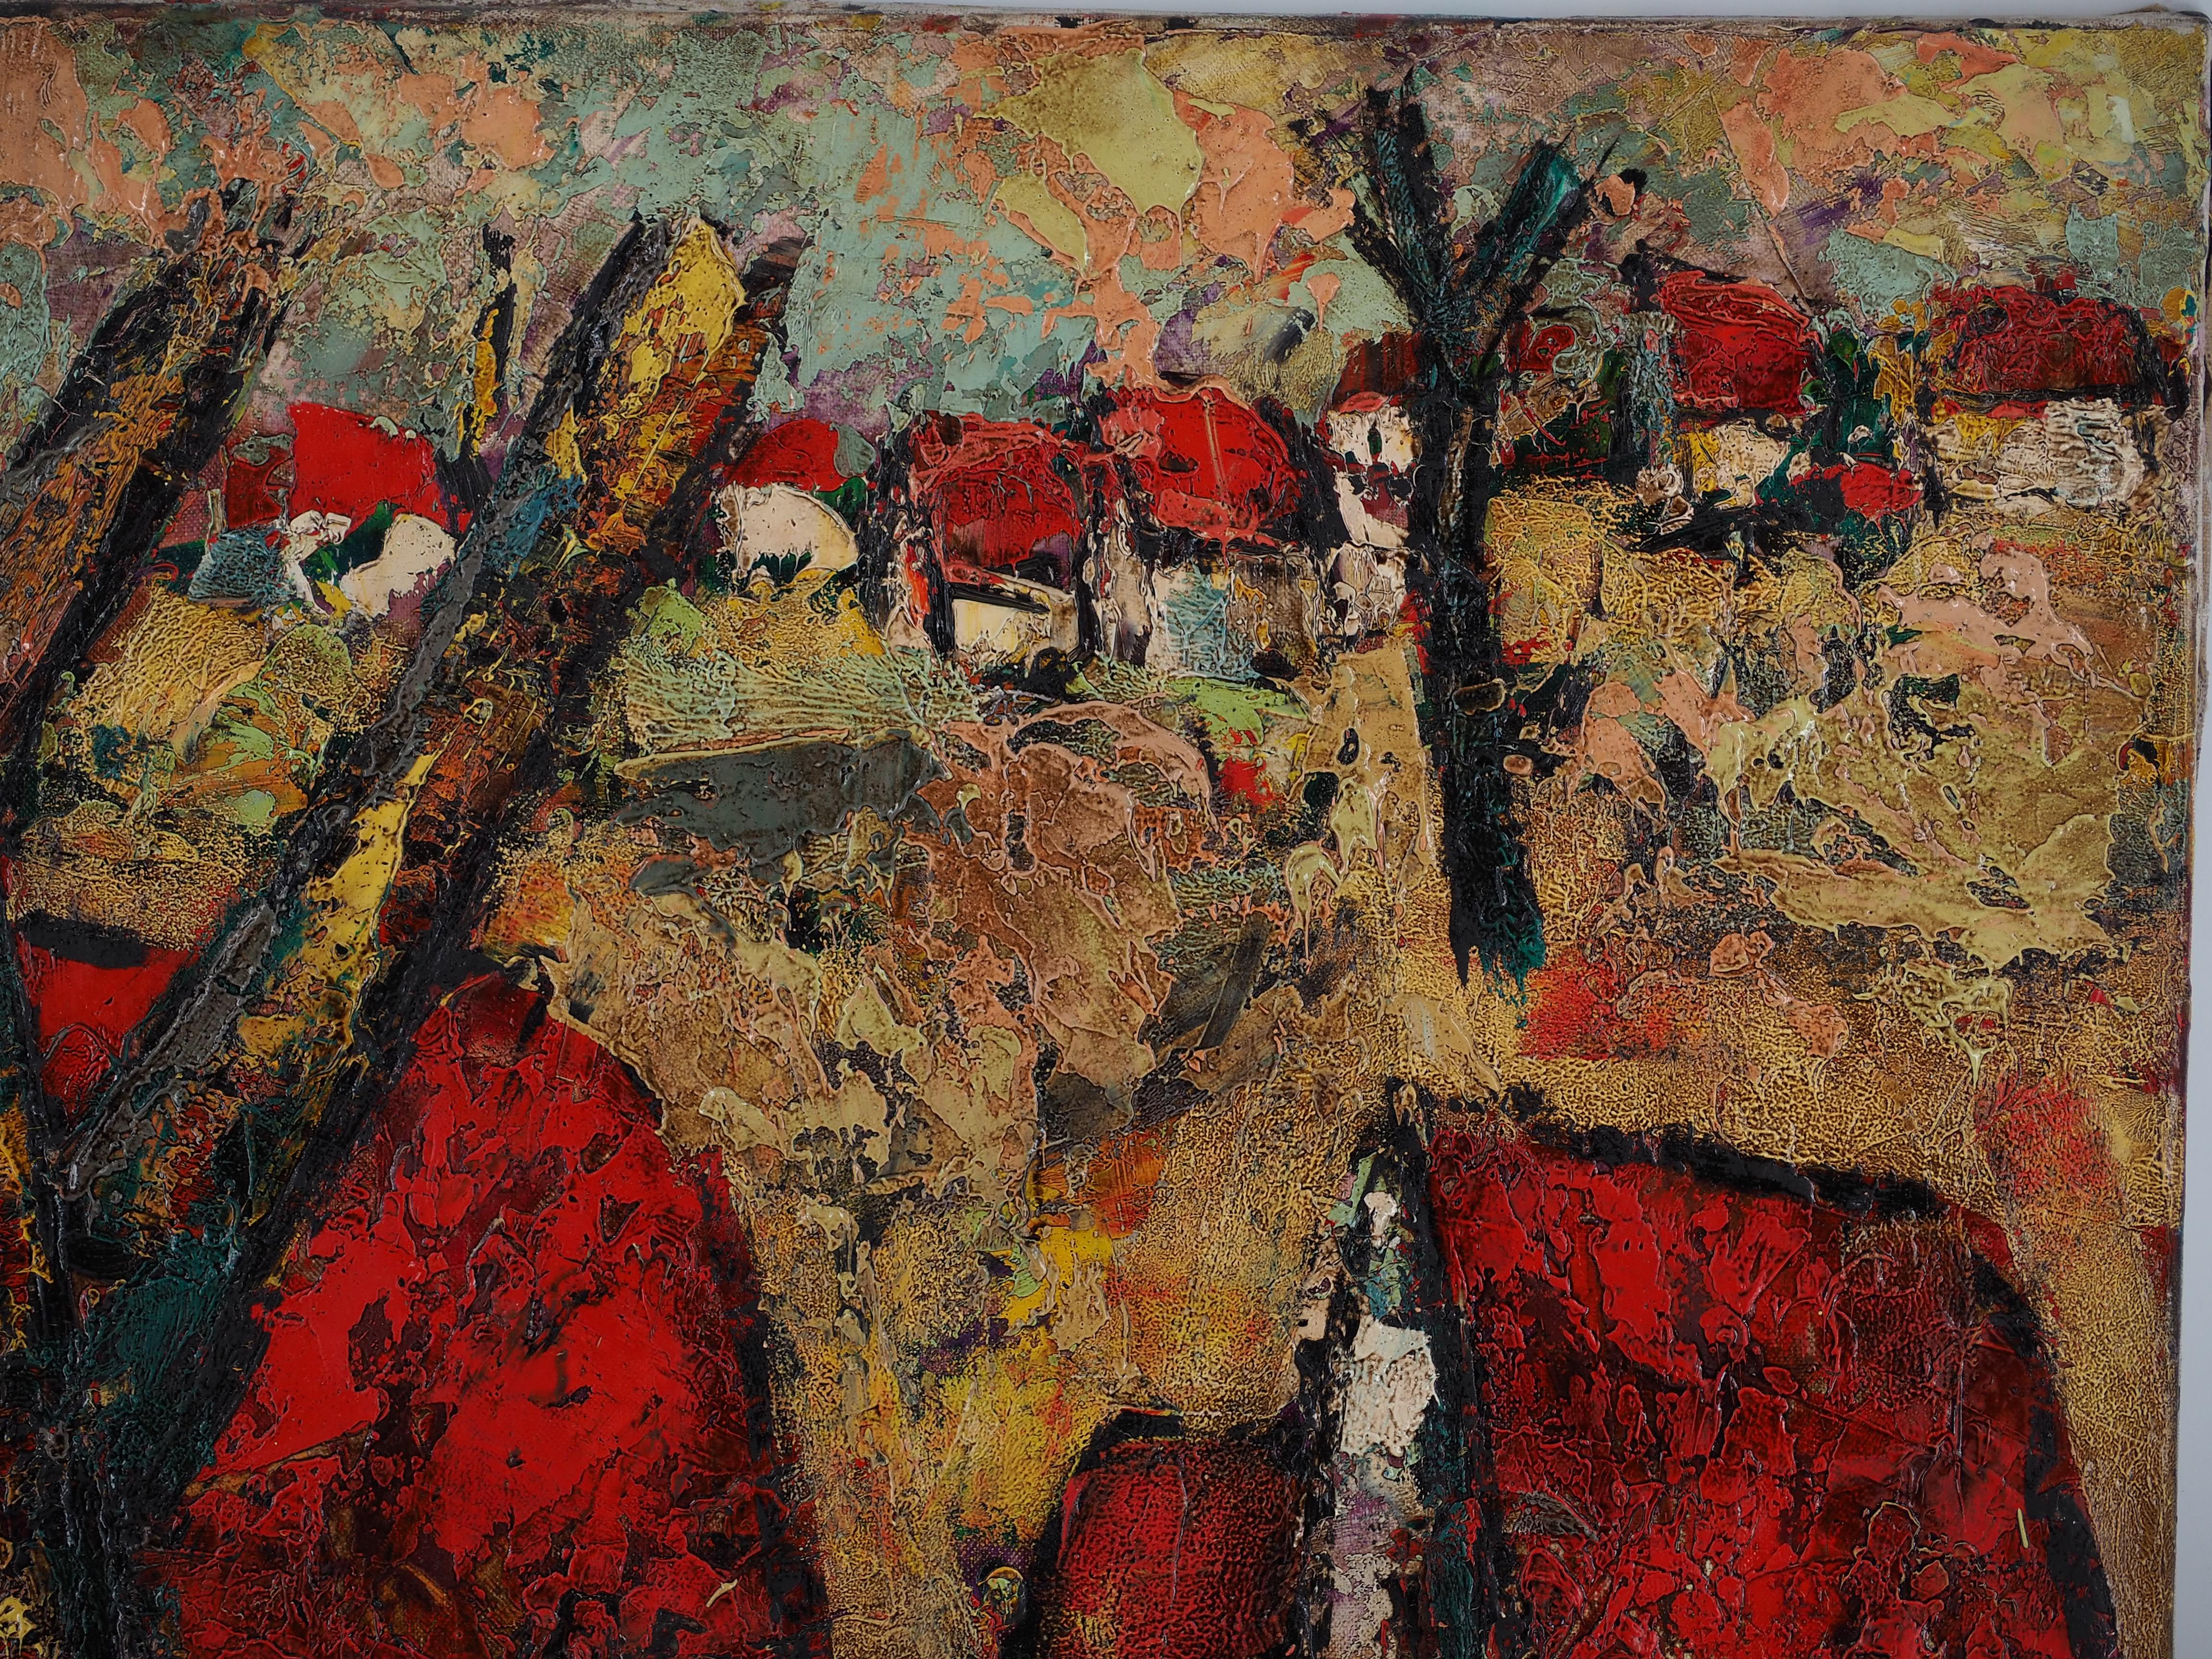 Brittany : The Red Roofs - Original Oil on canvas, Handsigned - Modern Painting by Henri d'Anty